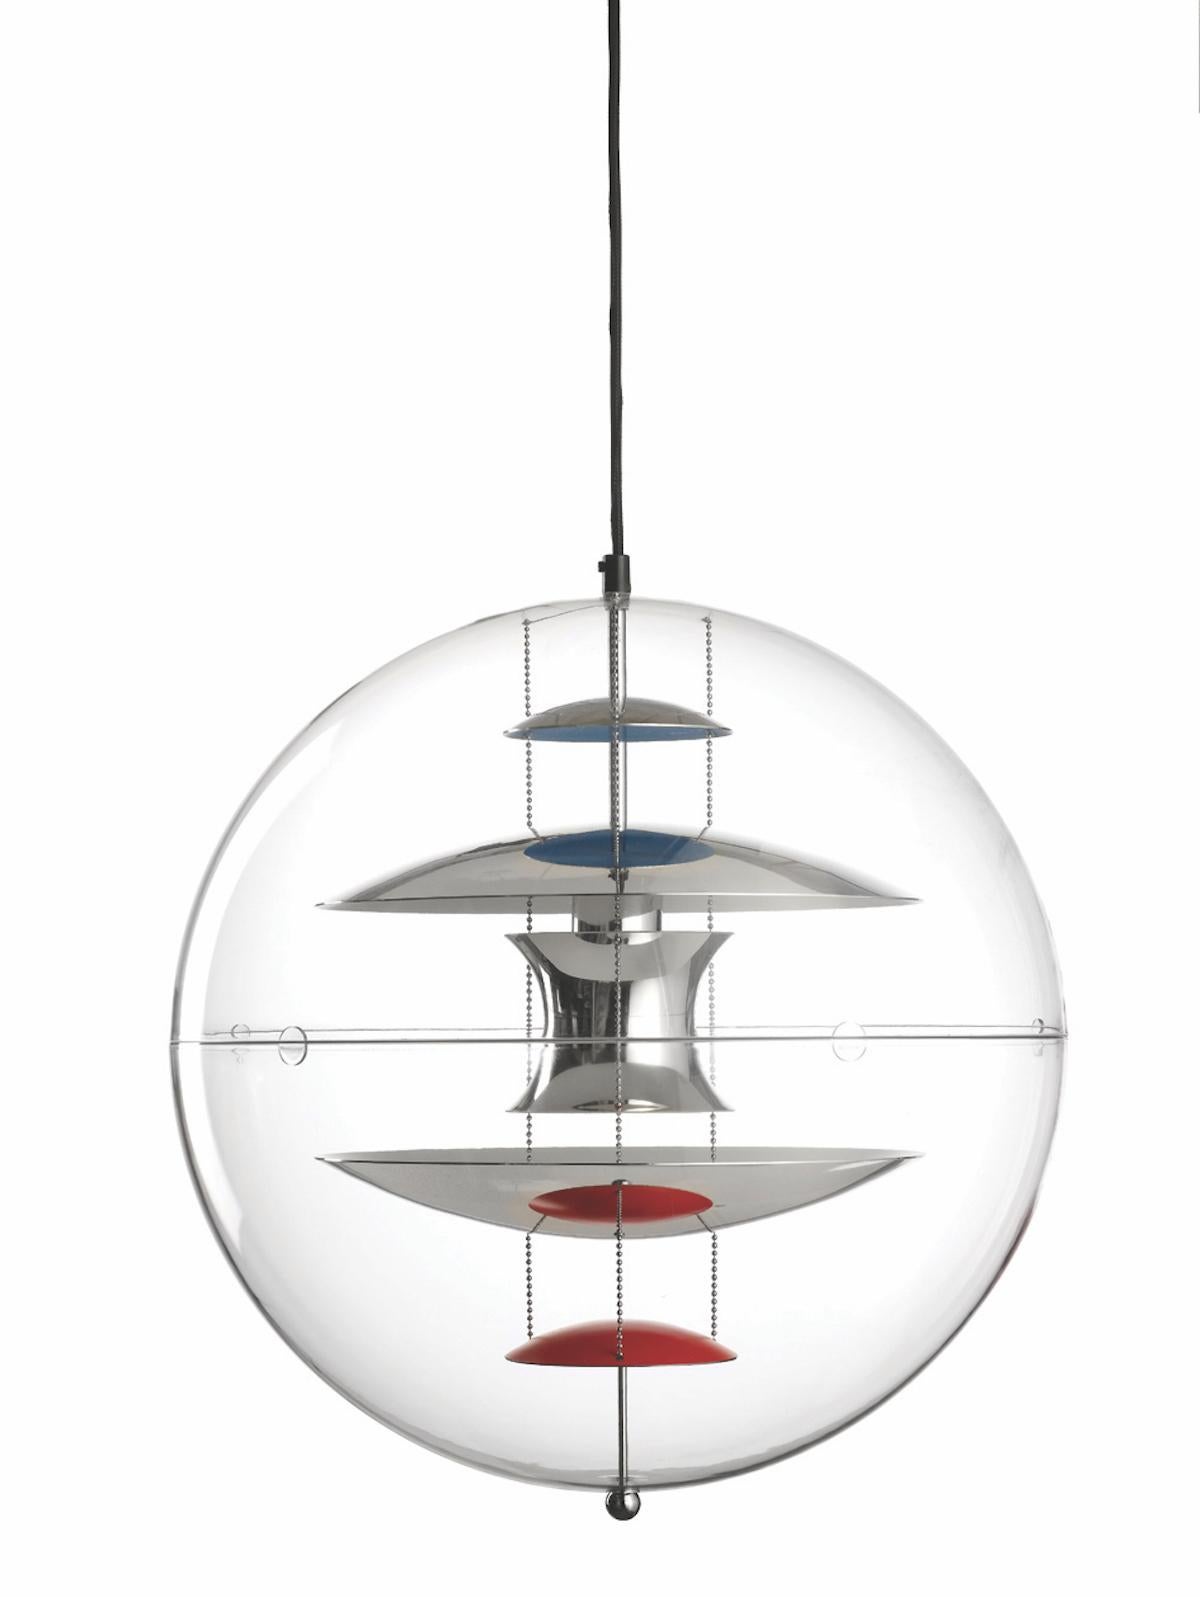  Pendant made of transparent acrylic. Five reflectors inside. Suspended by three steel chains. Includes ceiling canopy.  

Material: Reflectors are made of polished aluminum with two accent Colors (blue and red). Ceiling canopy is made of metal